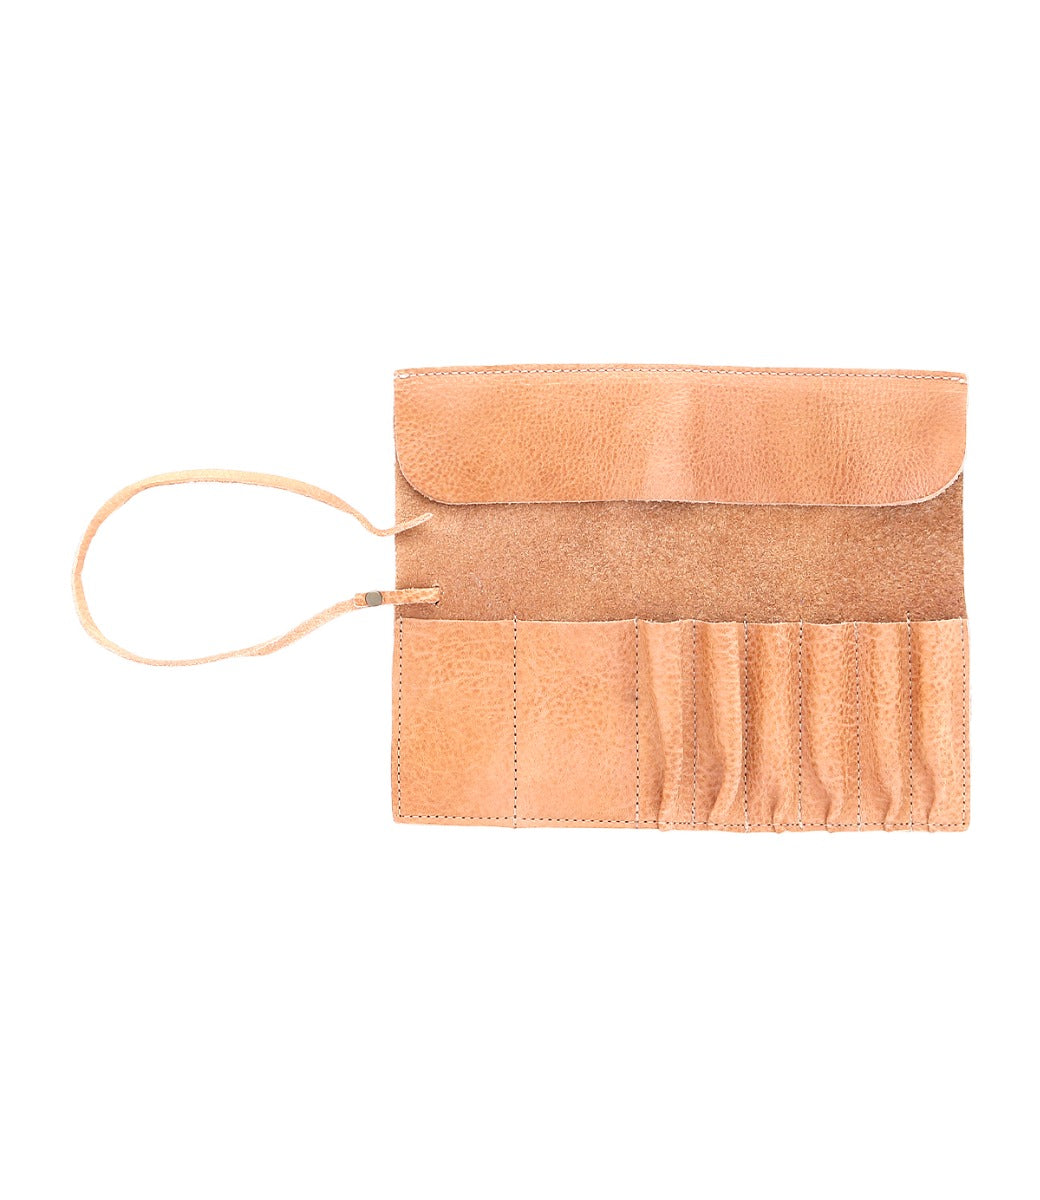 A Prepped by Bed Stu tan leather wallet on a white background.